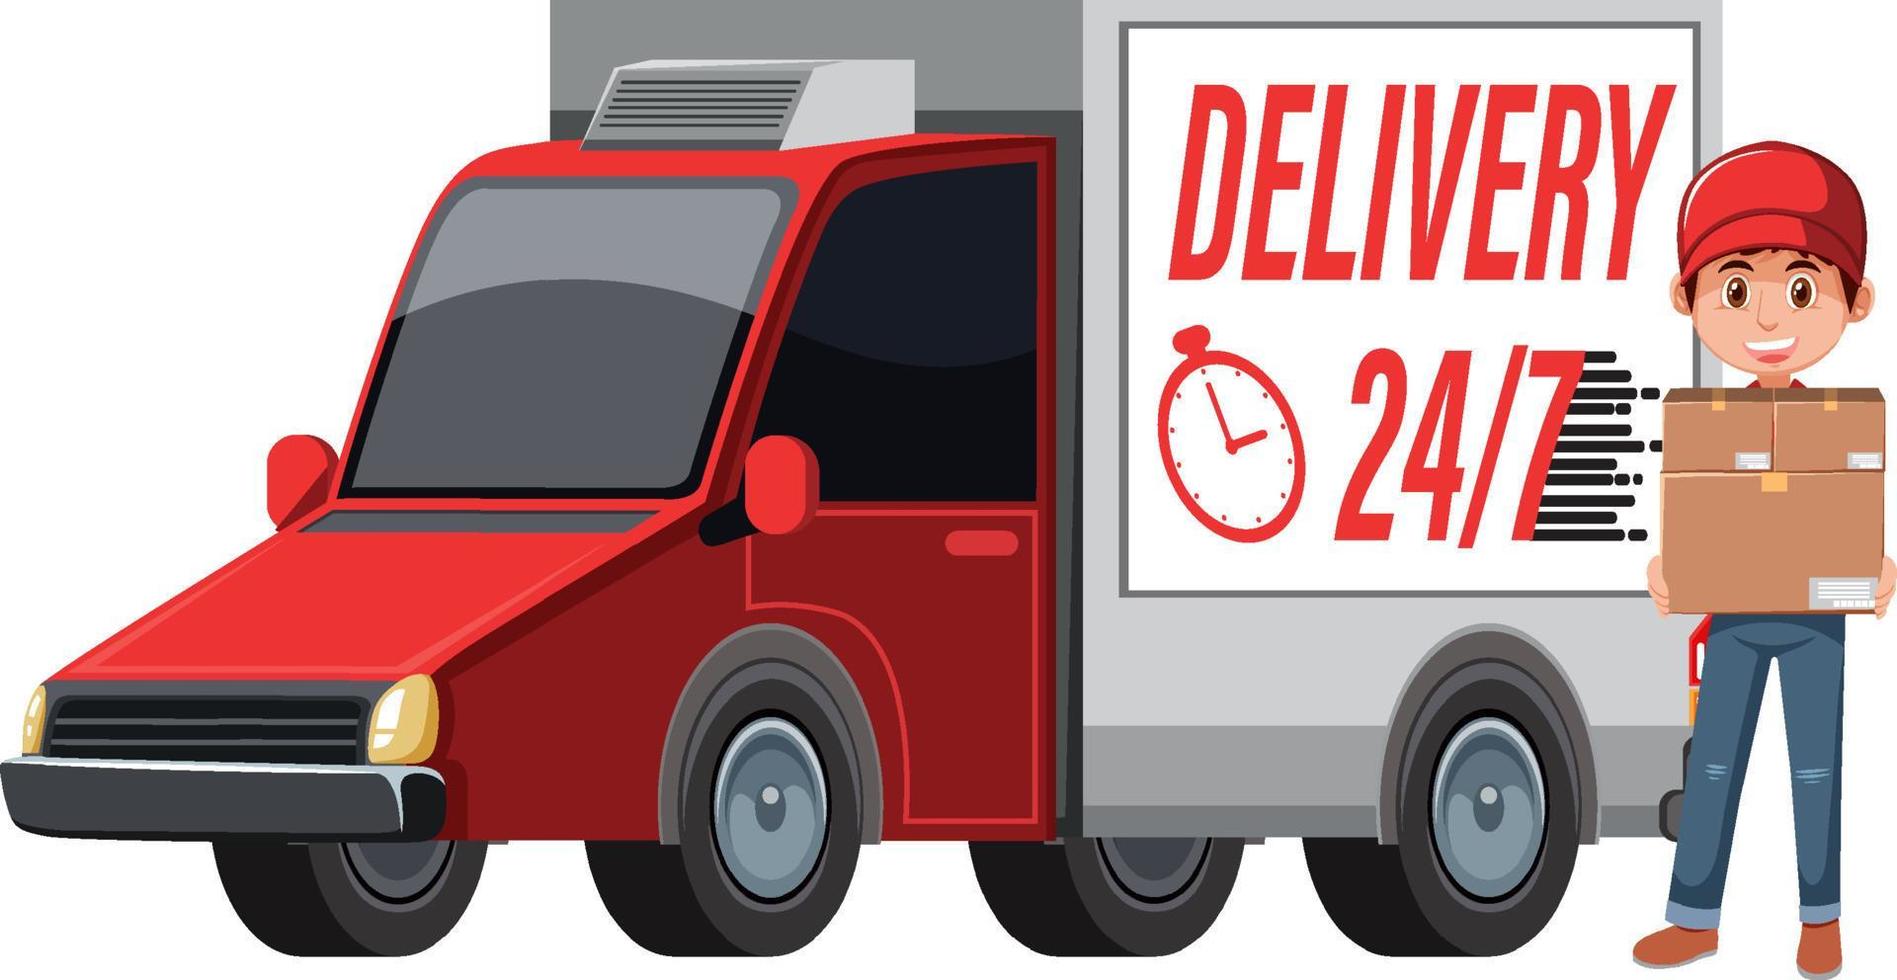 Delivery truck with delivery banner vector